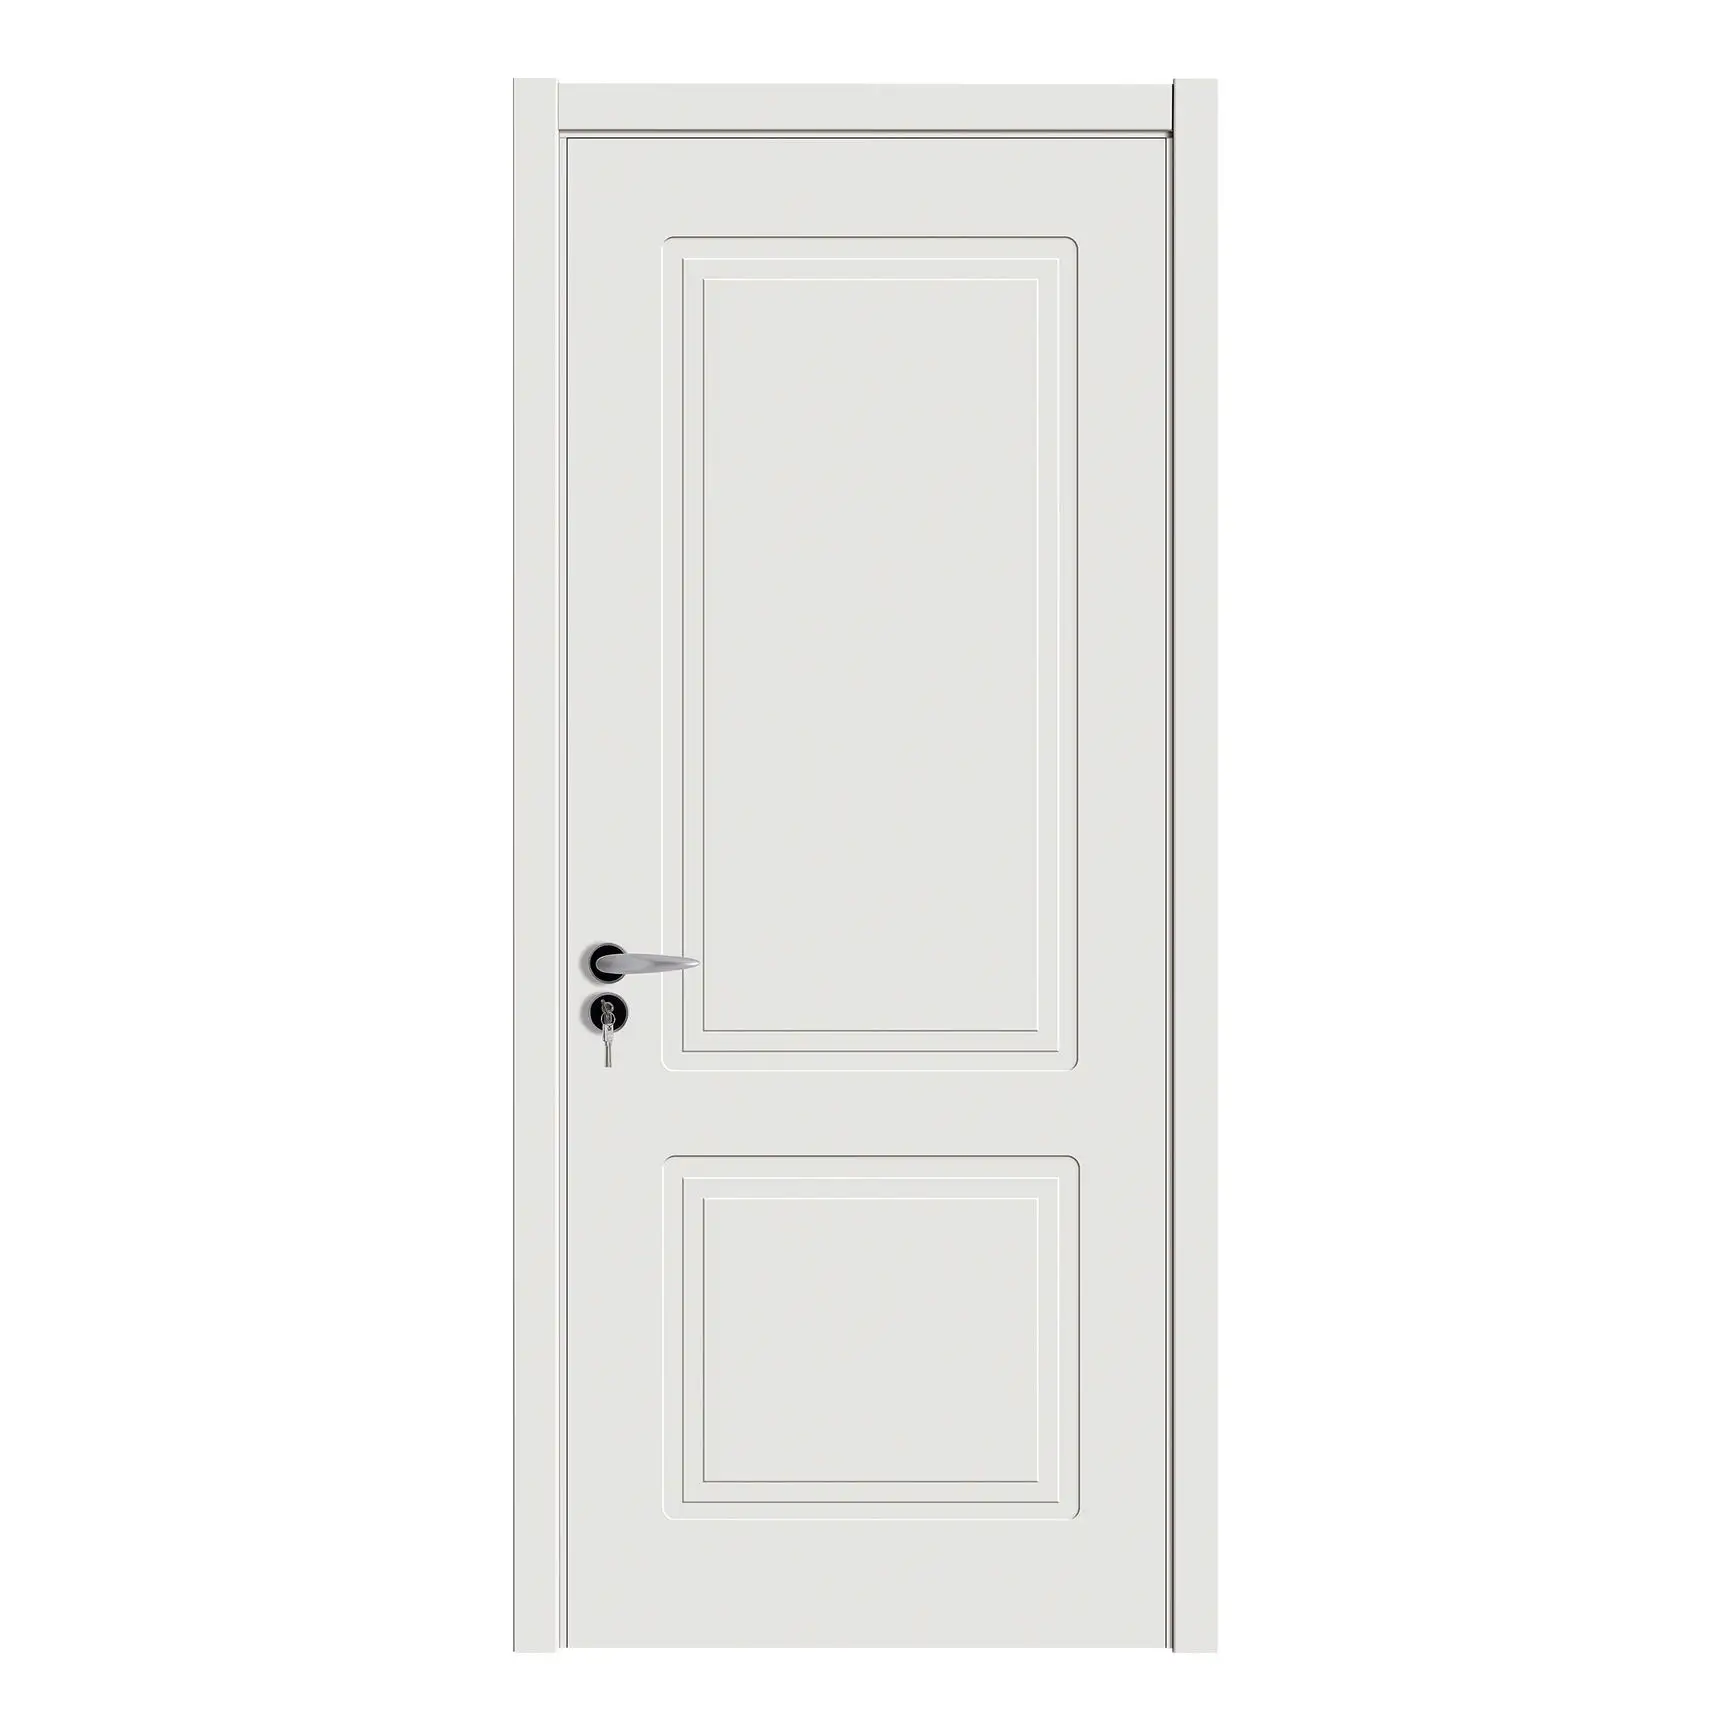 Factory Wholesale Light Color Series Interior PVC MDF Wooden Doors For Houses Rooms